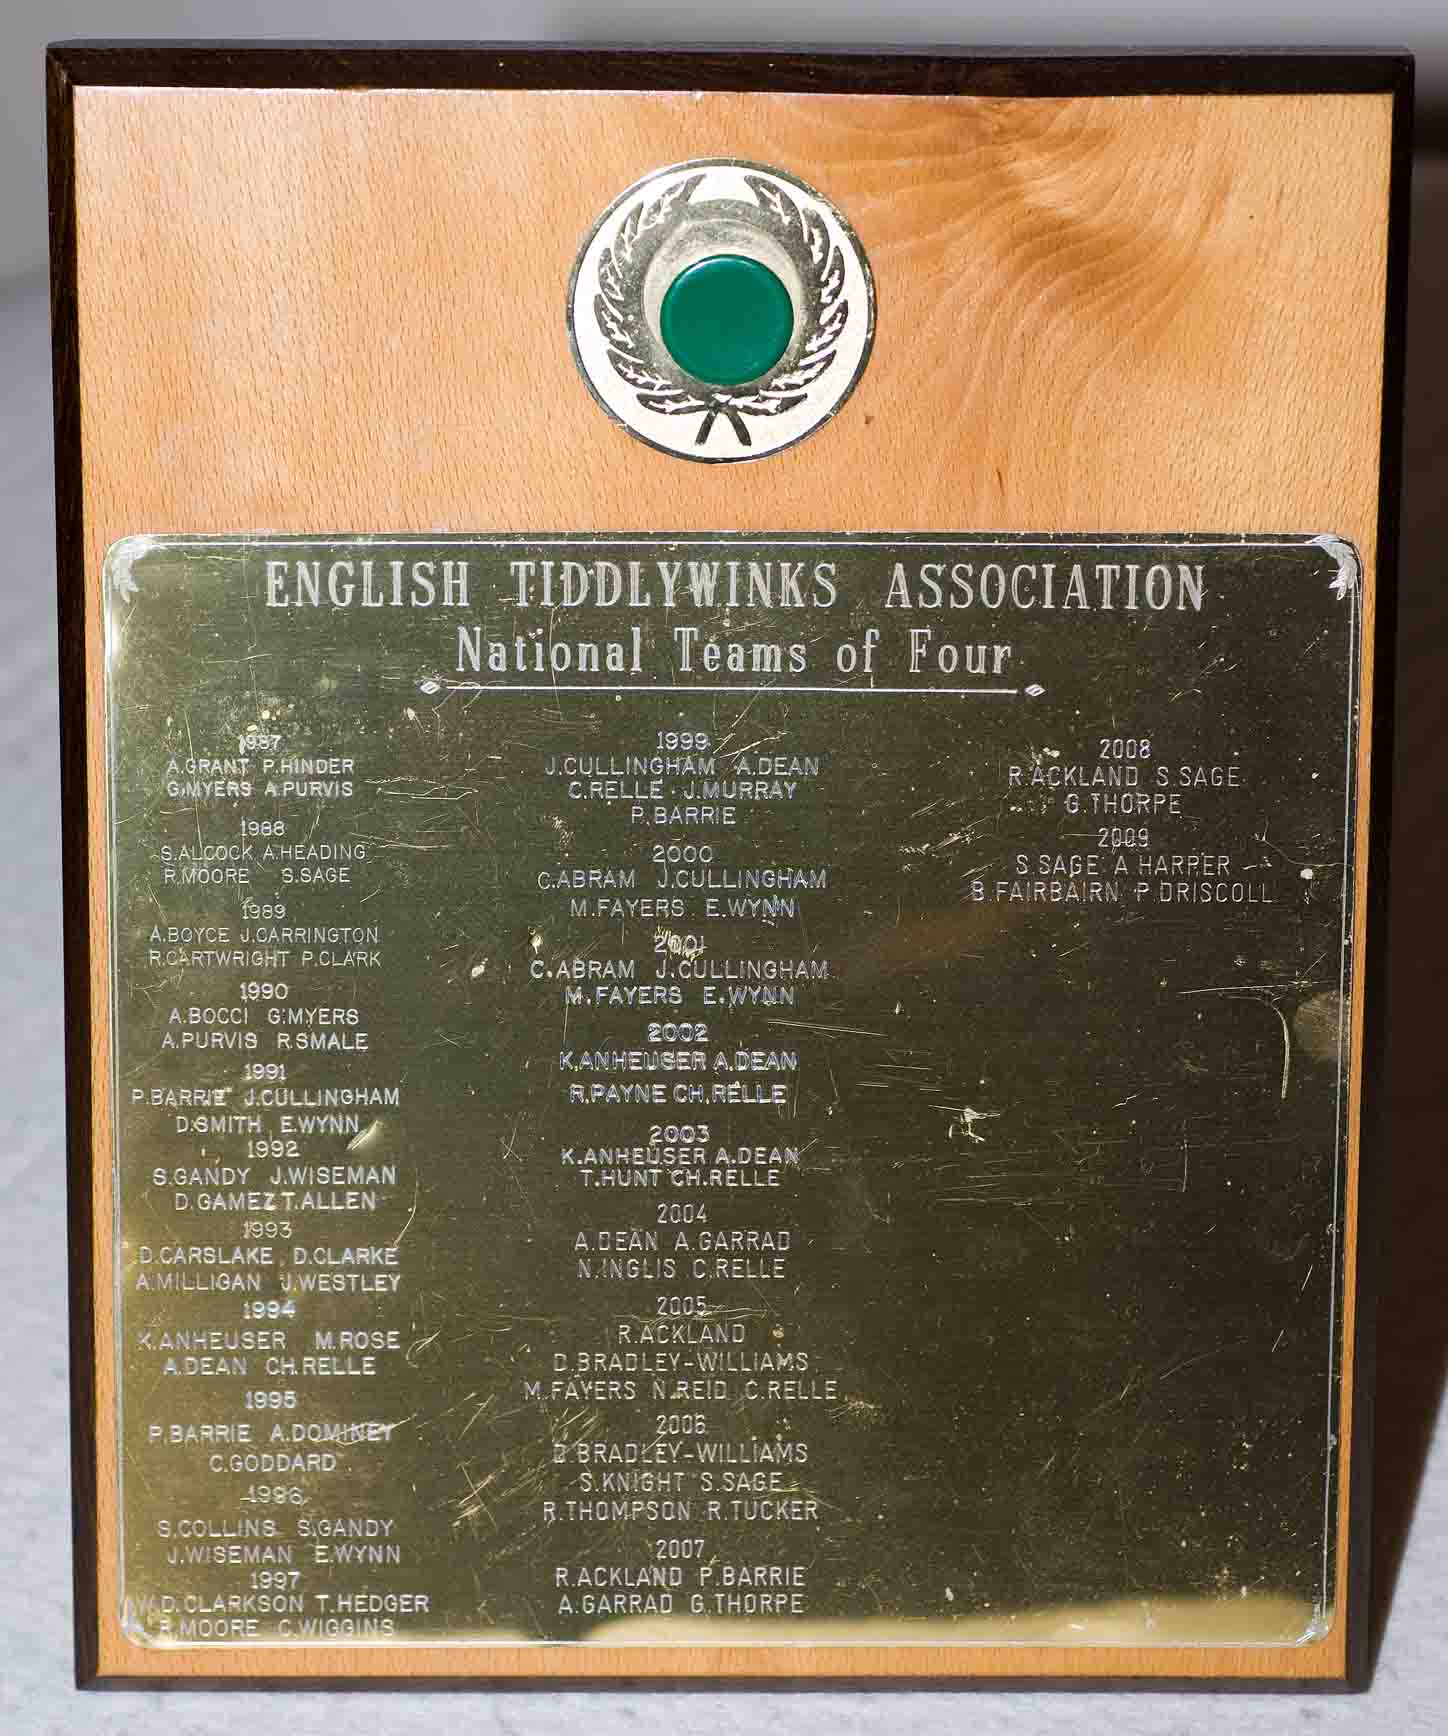 The ETwA National Teams of Four